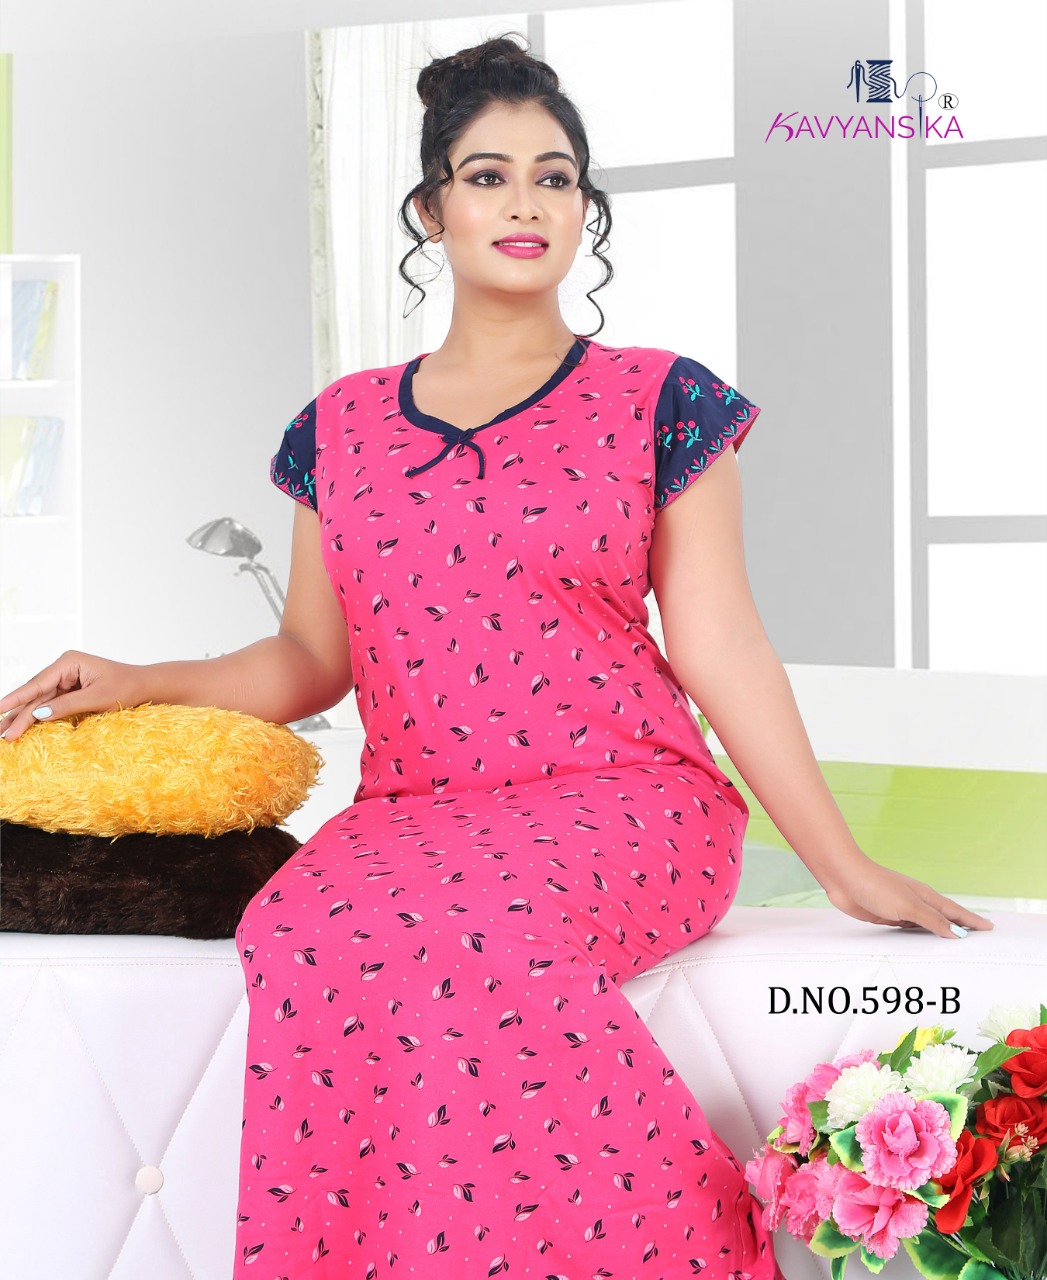 Kavyansika Vol 598 Premium Hosiery Nighty With Embroidery Collection